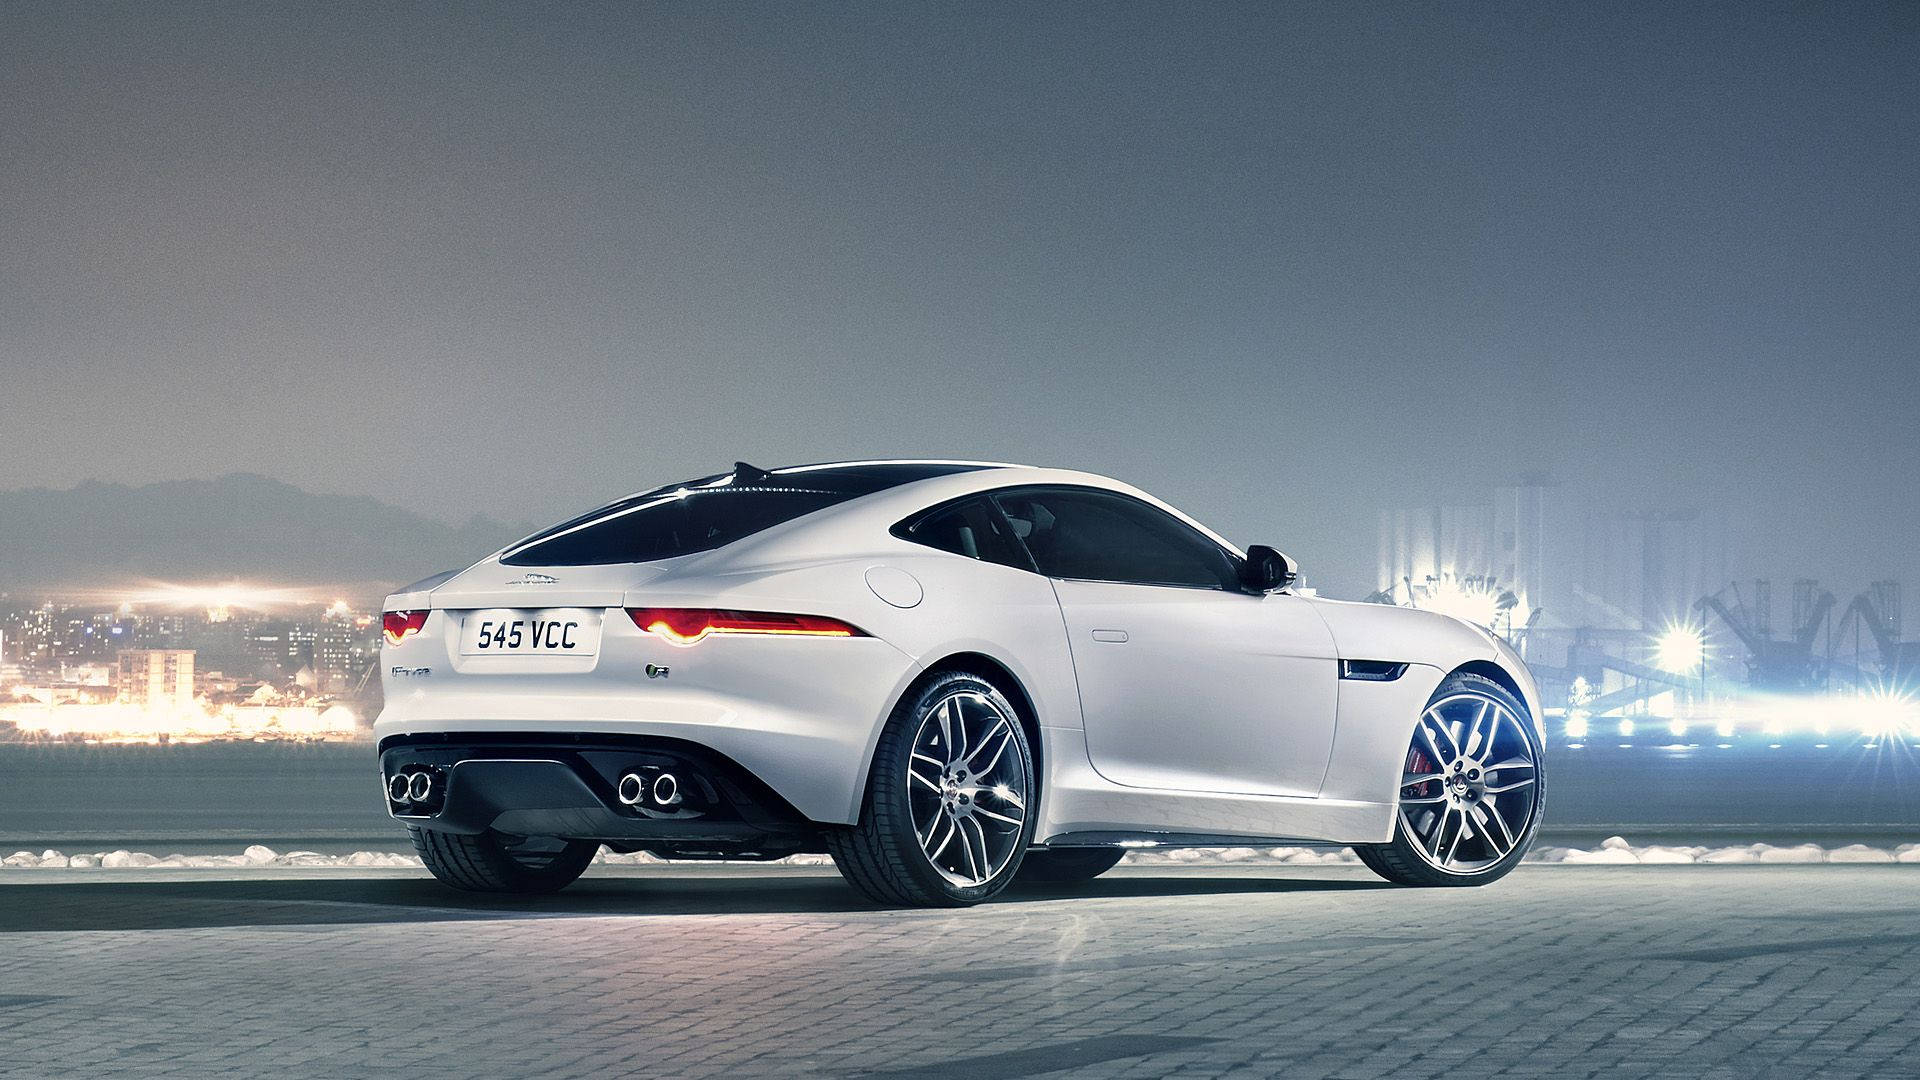 Speed into the night with this sleek, silver Jaguar car Wallpaper